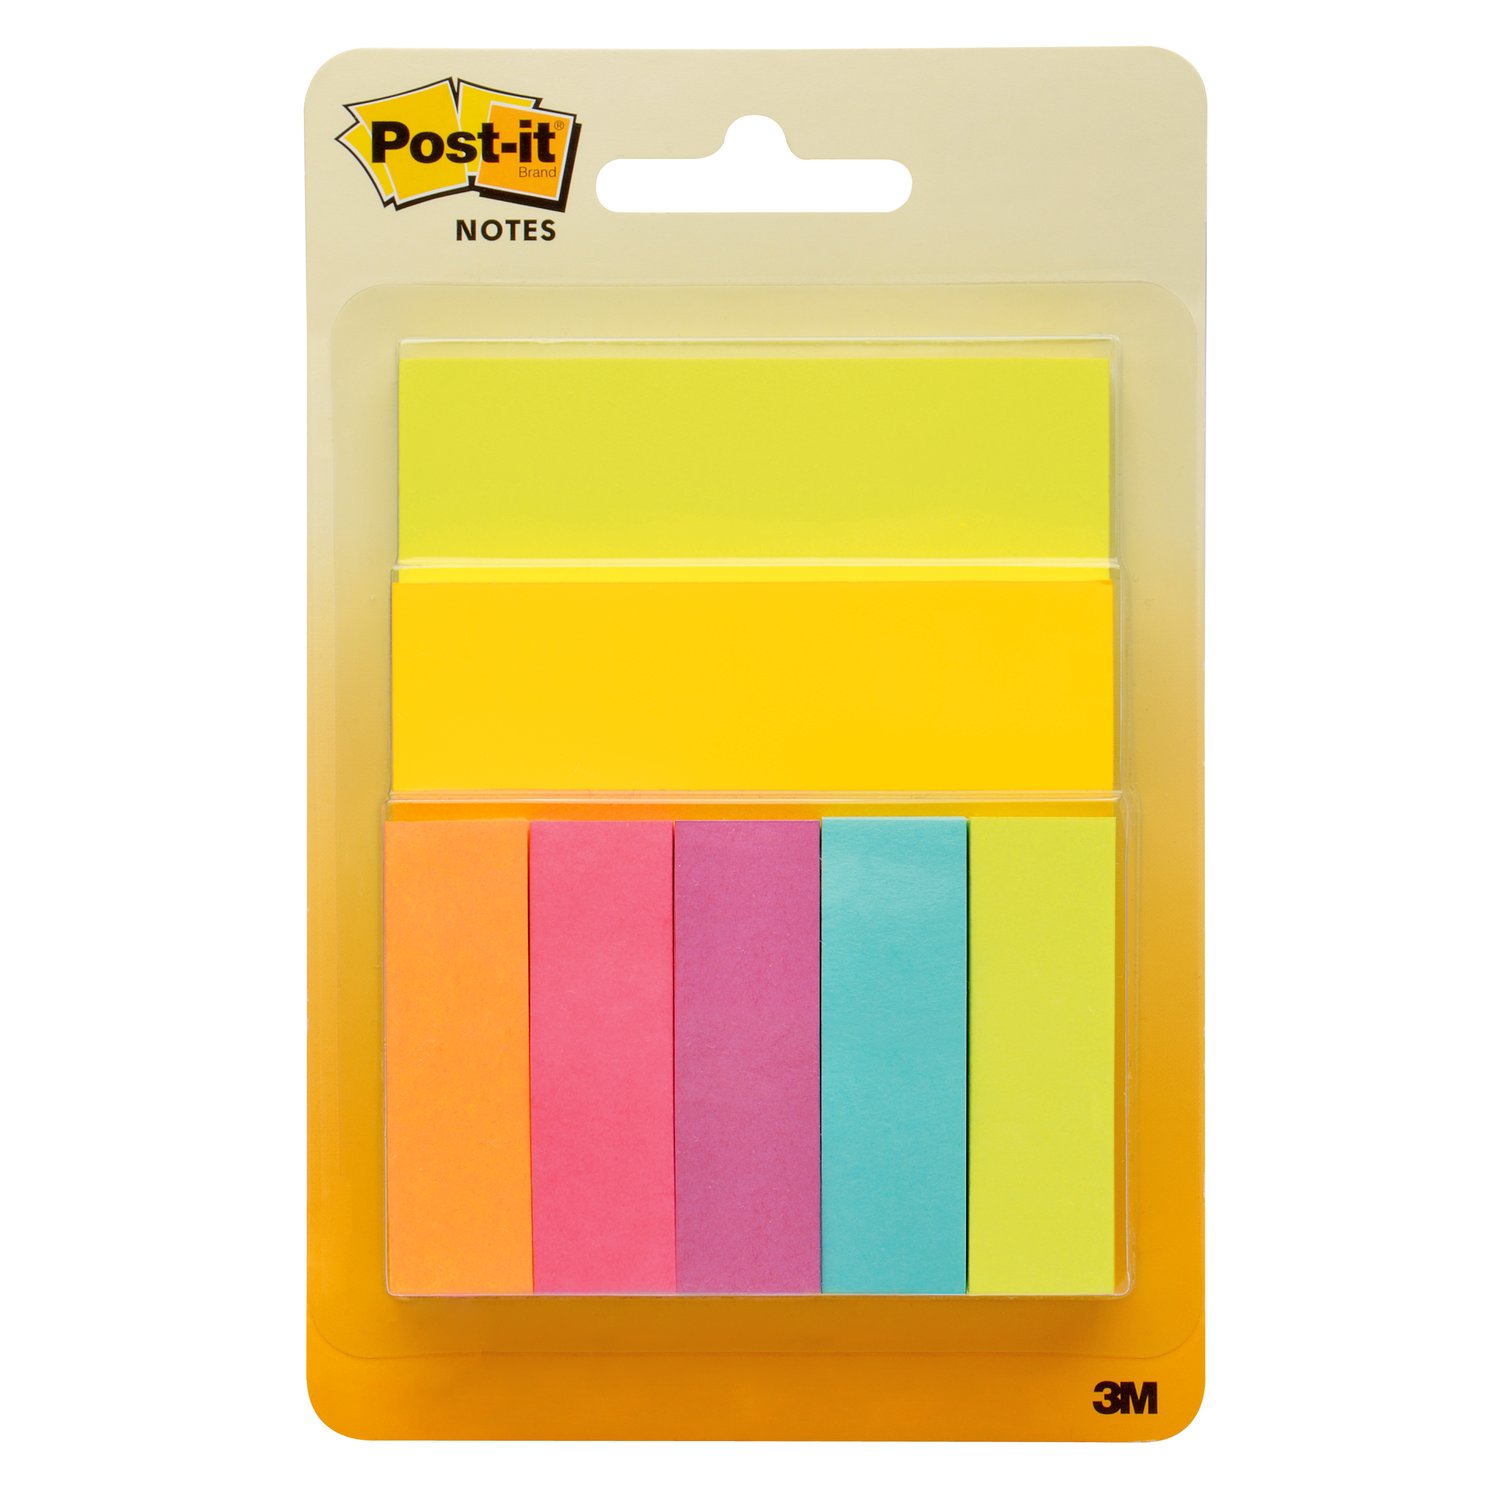 7010301803 - Post-it Notes 343P-A, 3 in x 4 in (76 mm x 101 mm)